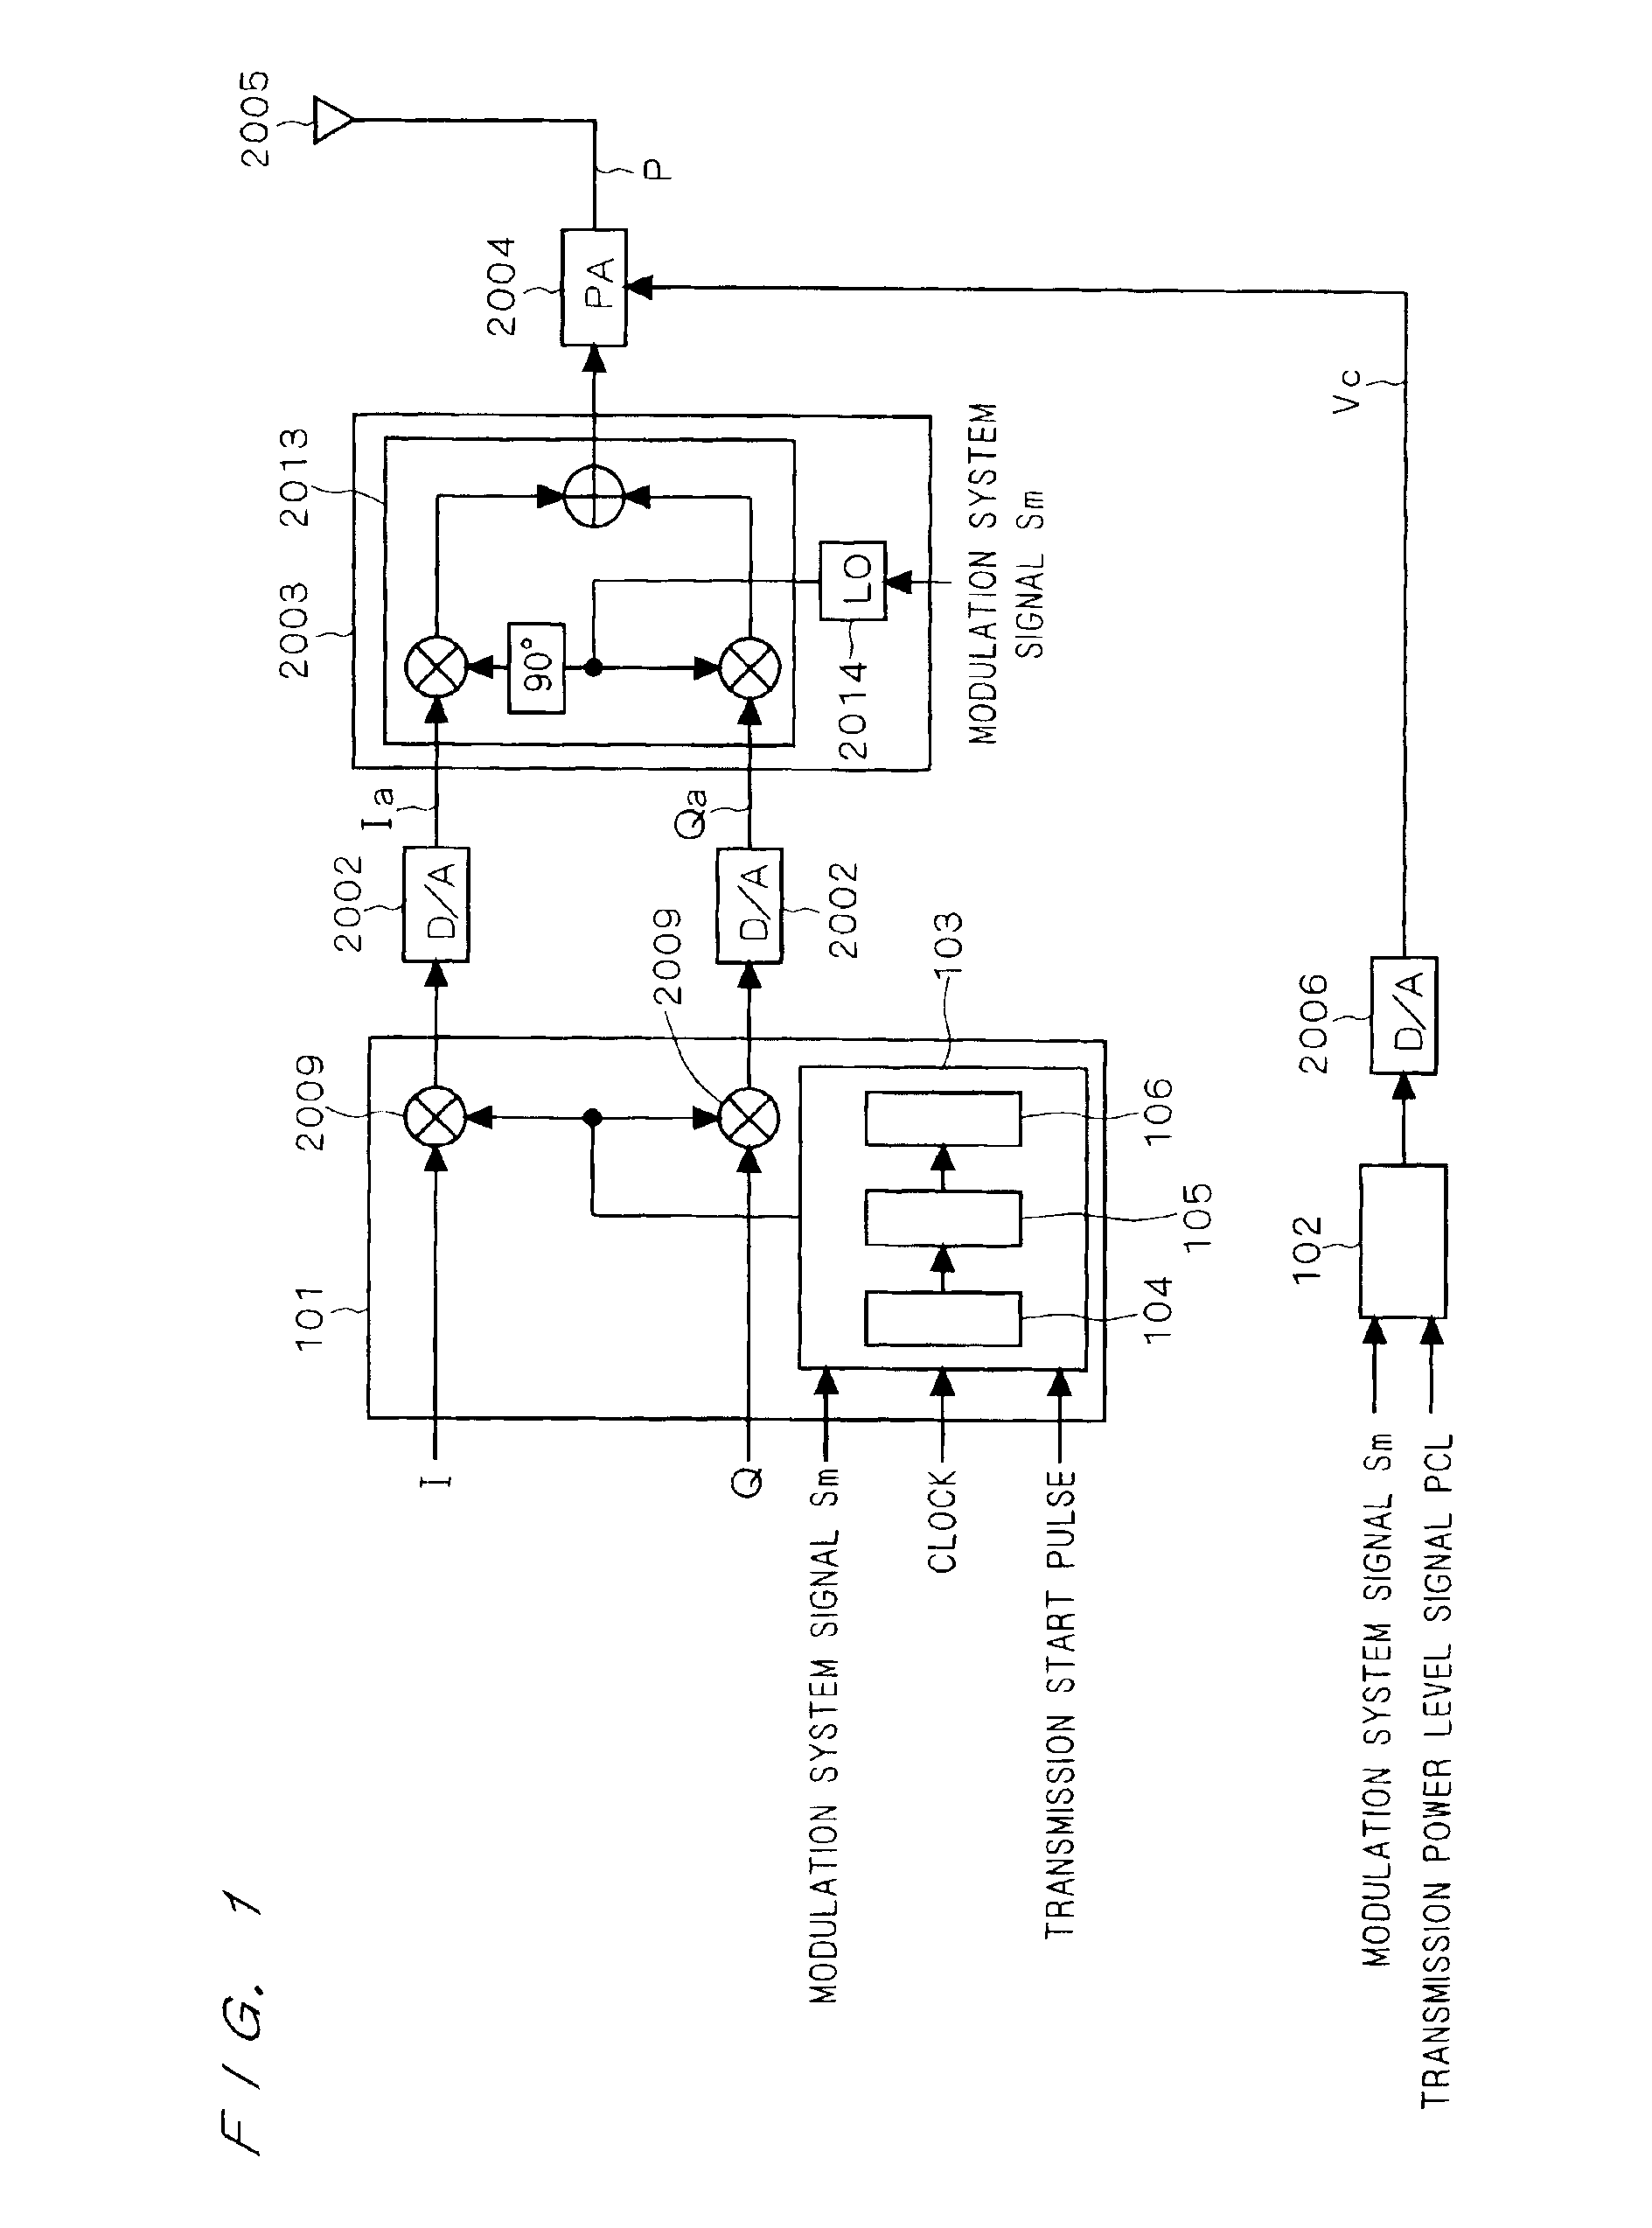 Transmission output power control device for use in a burst transmitter and control method